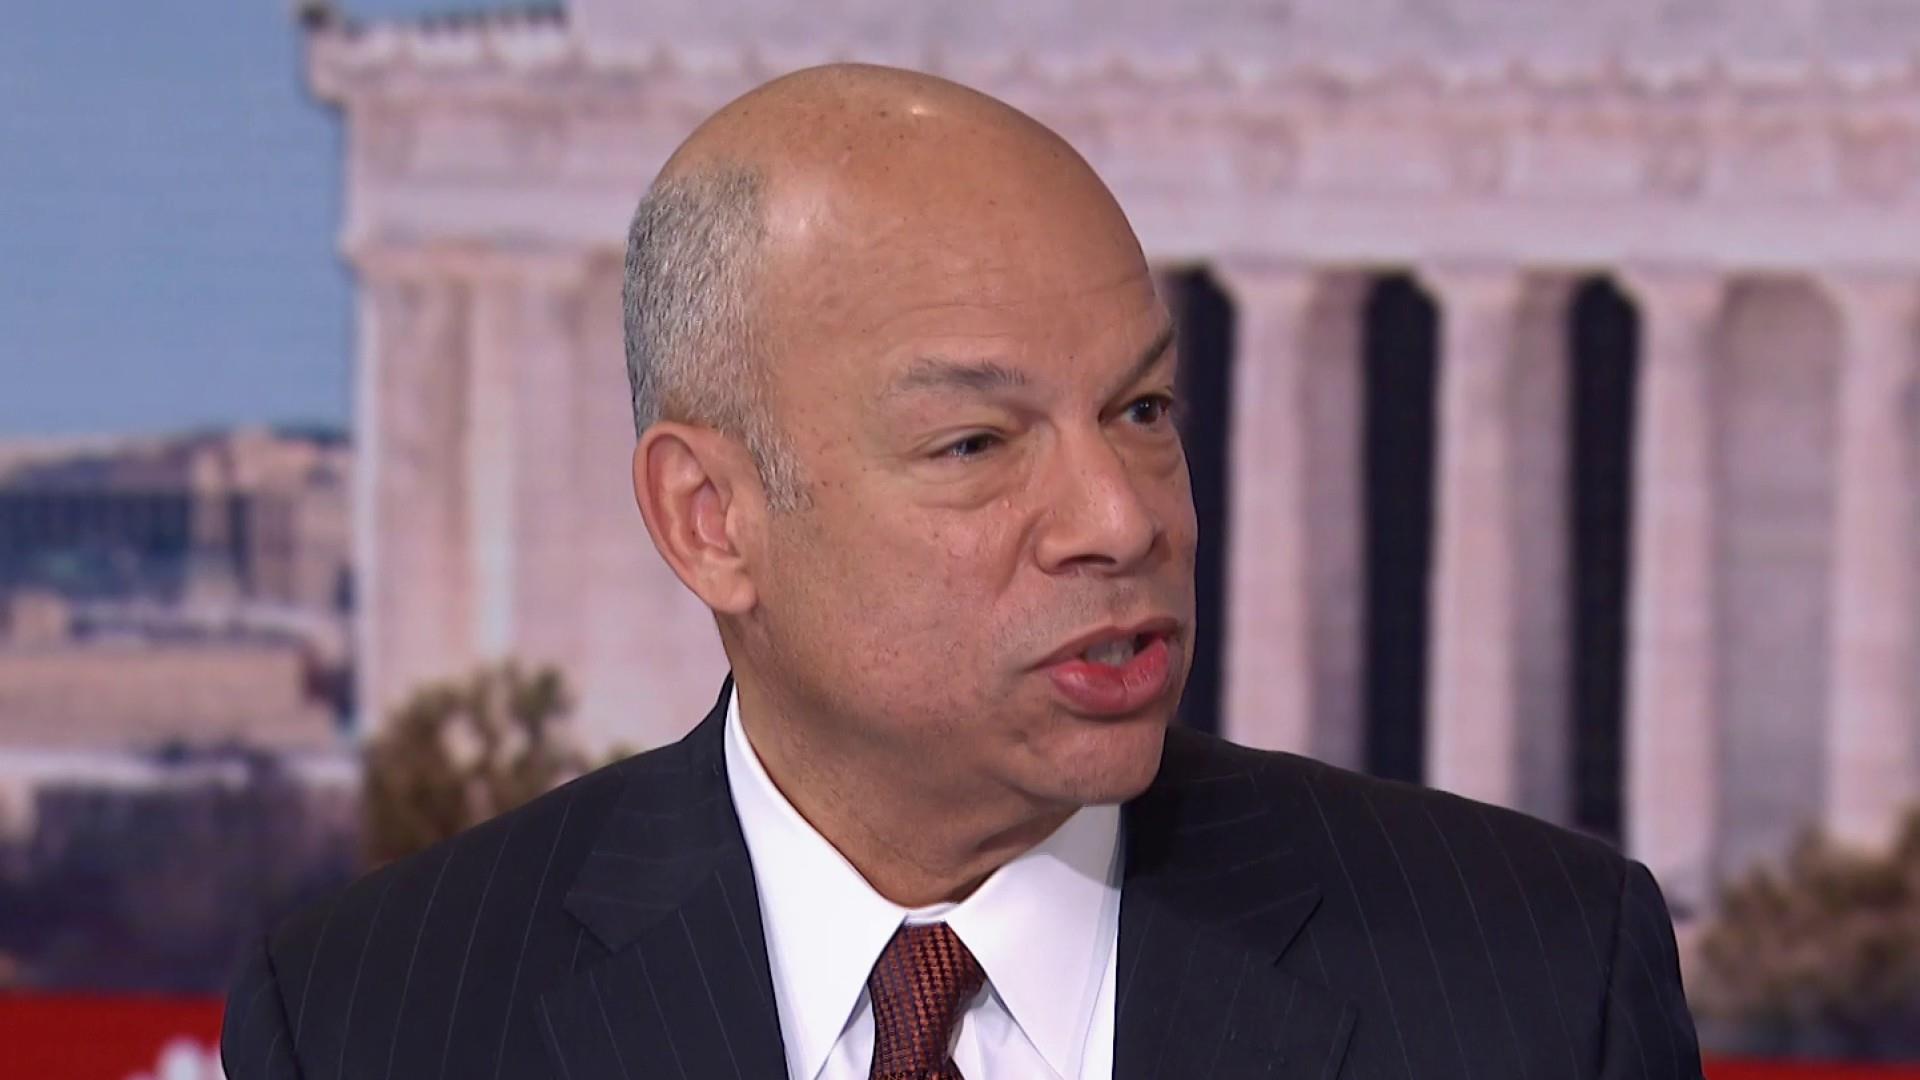 Flipboard: Jeh Johnson on the trial: We only probably know the tip of the iceberg1920 x 1080